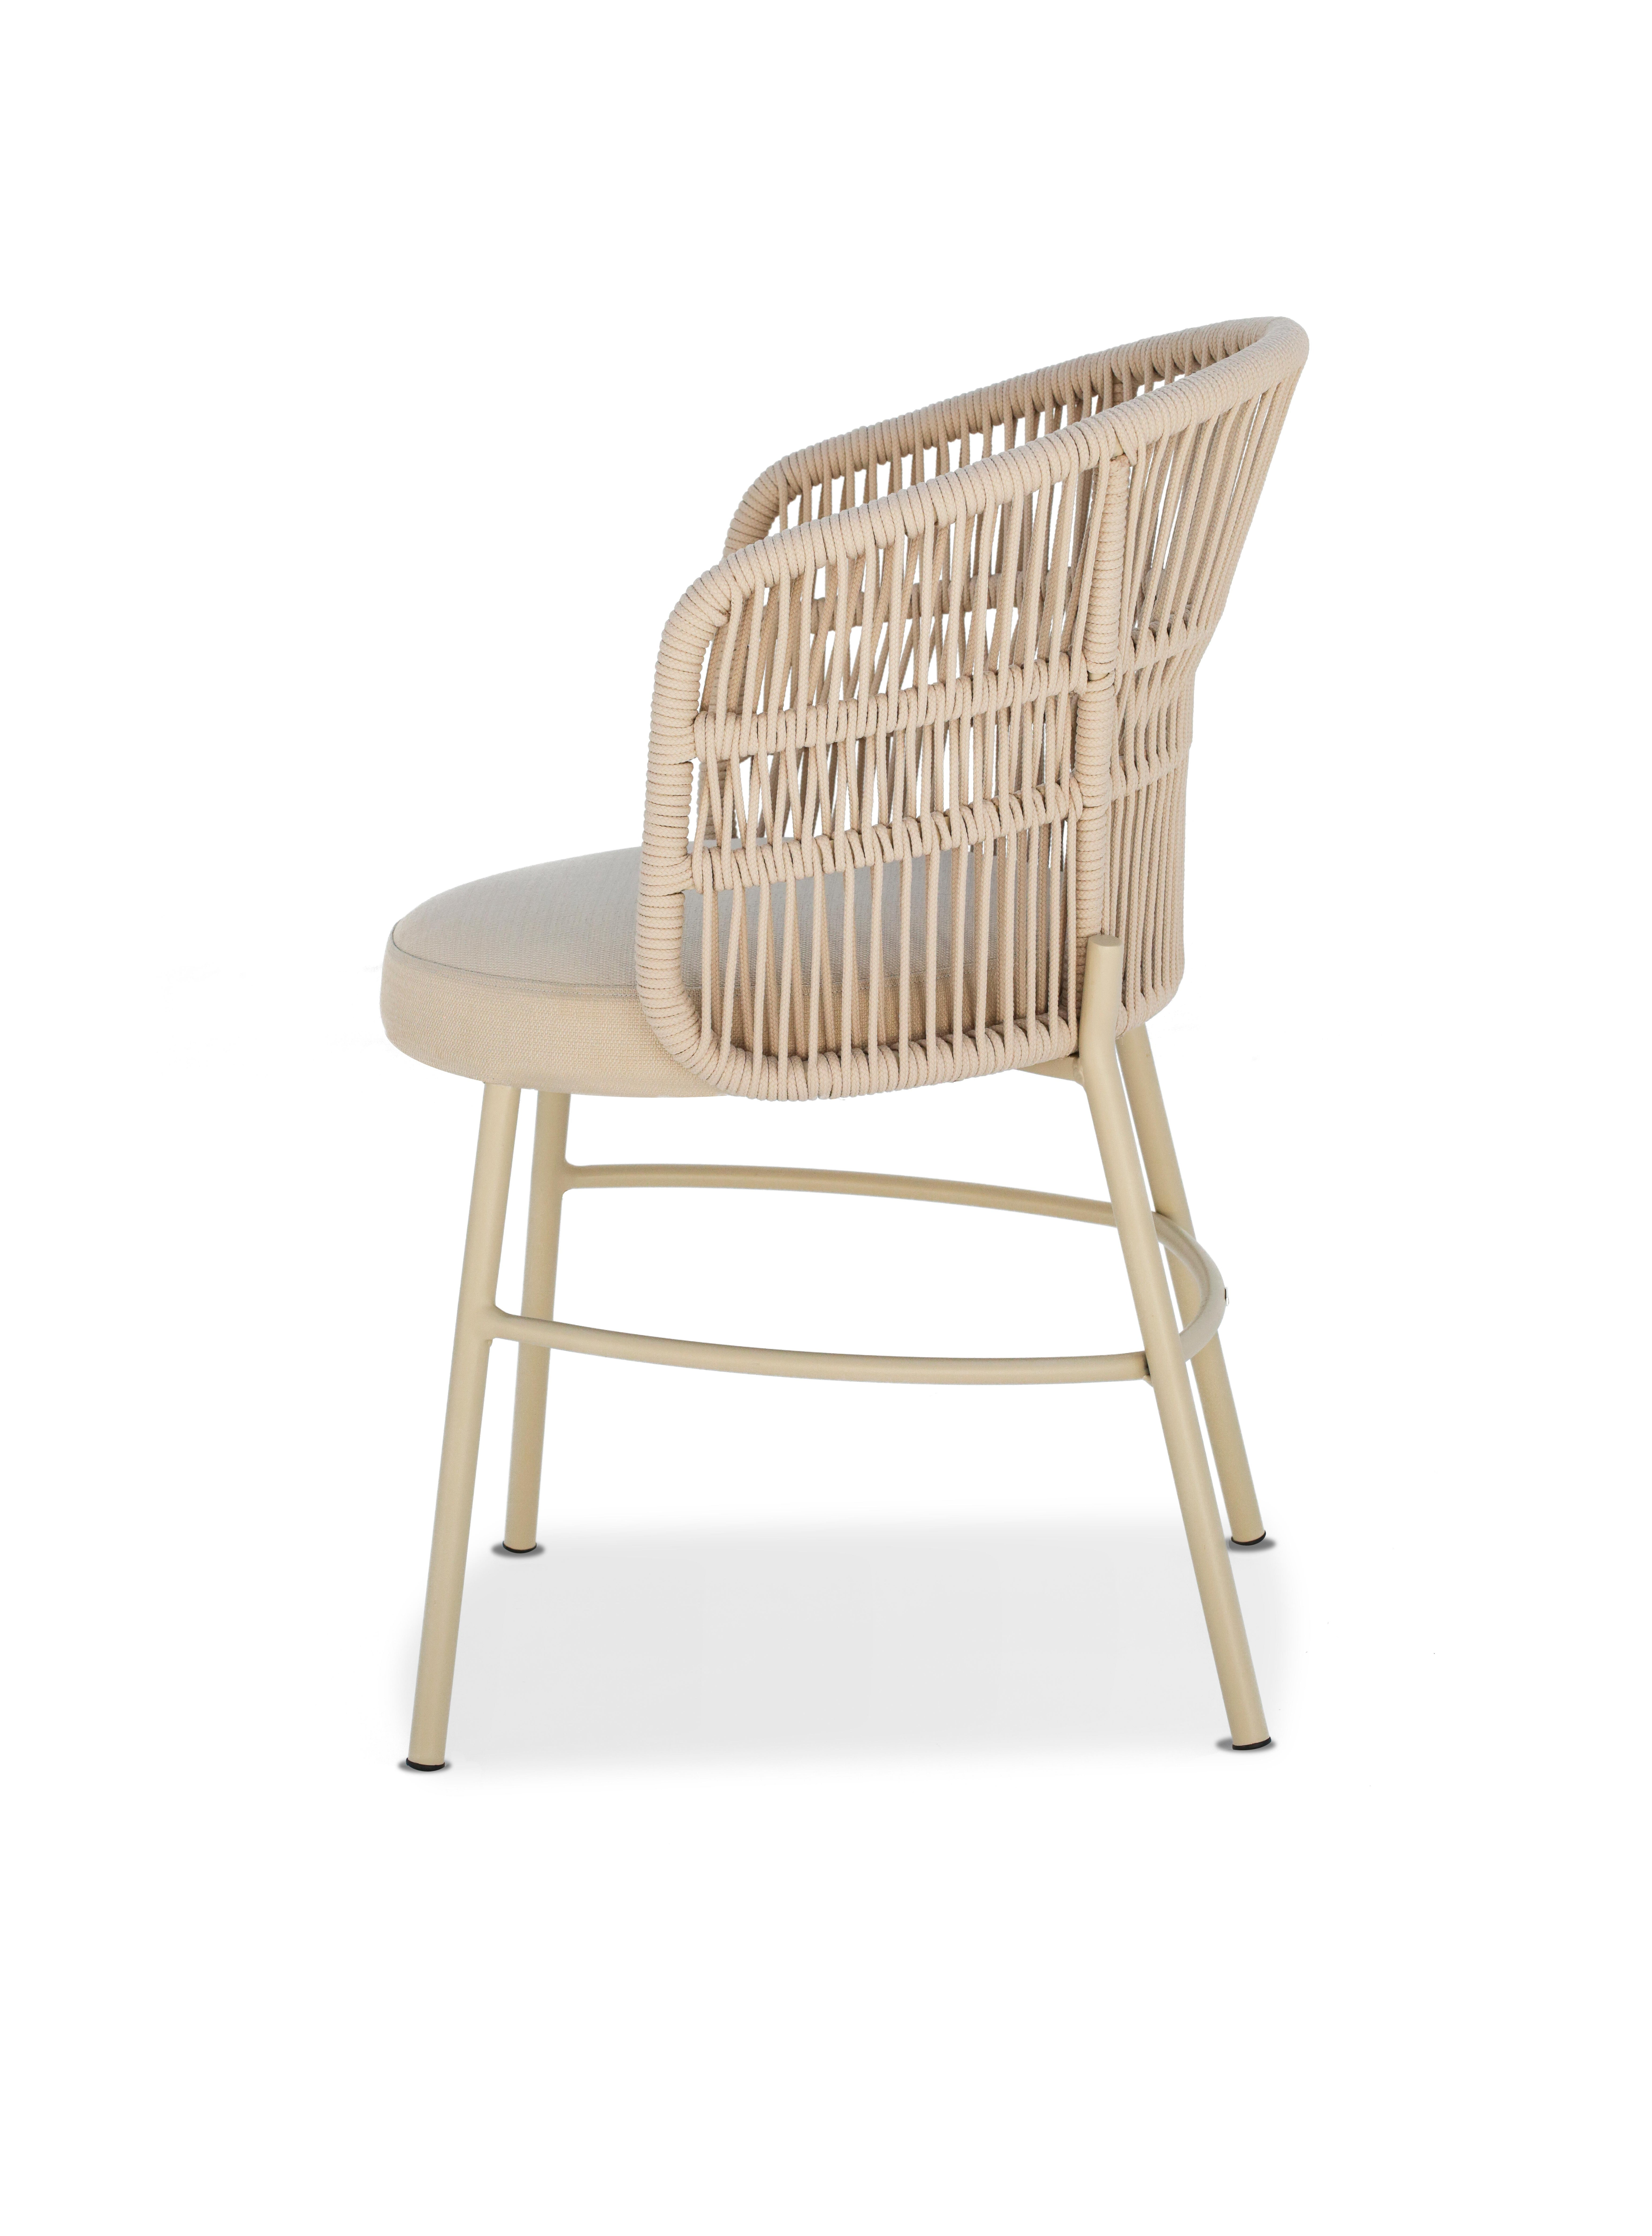 With its curved and fluid shapes, the design of the Amalfi chair is inspired by the Italian Amalfi Coast nature.
The fluidity of the design offers a clean, timeless design that is easy to combine in environments.

The structure is made of aluminum